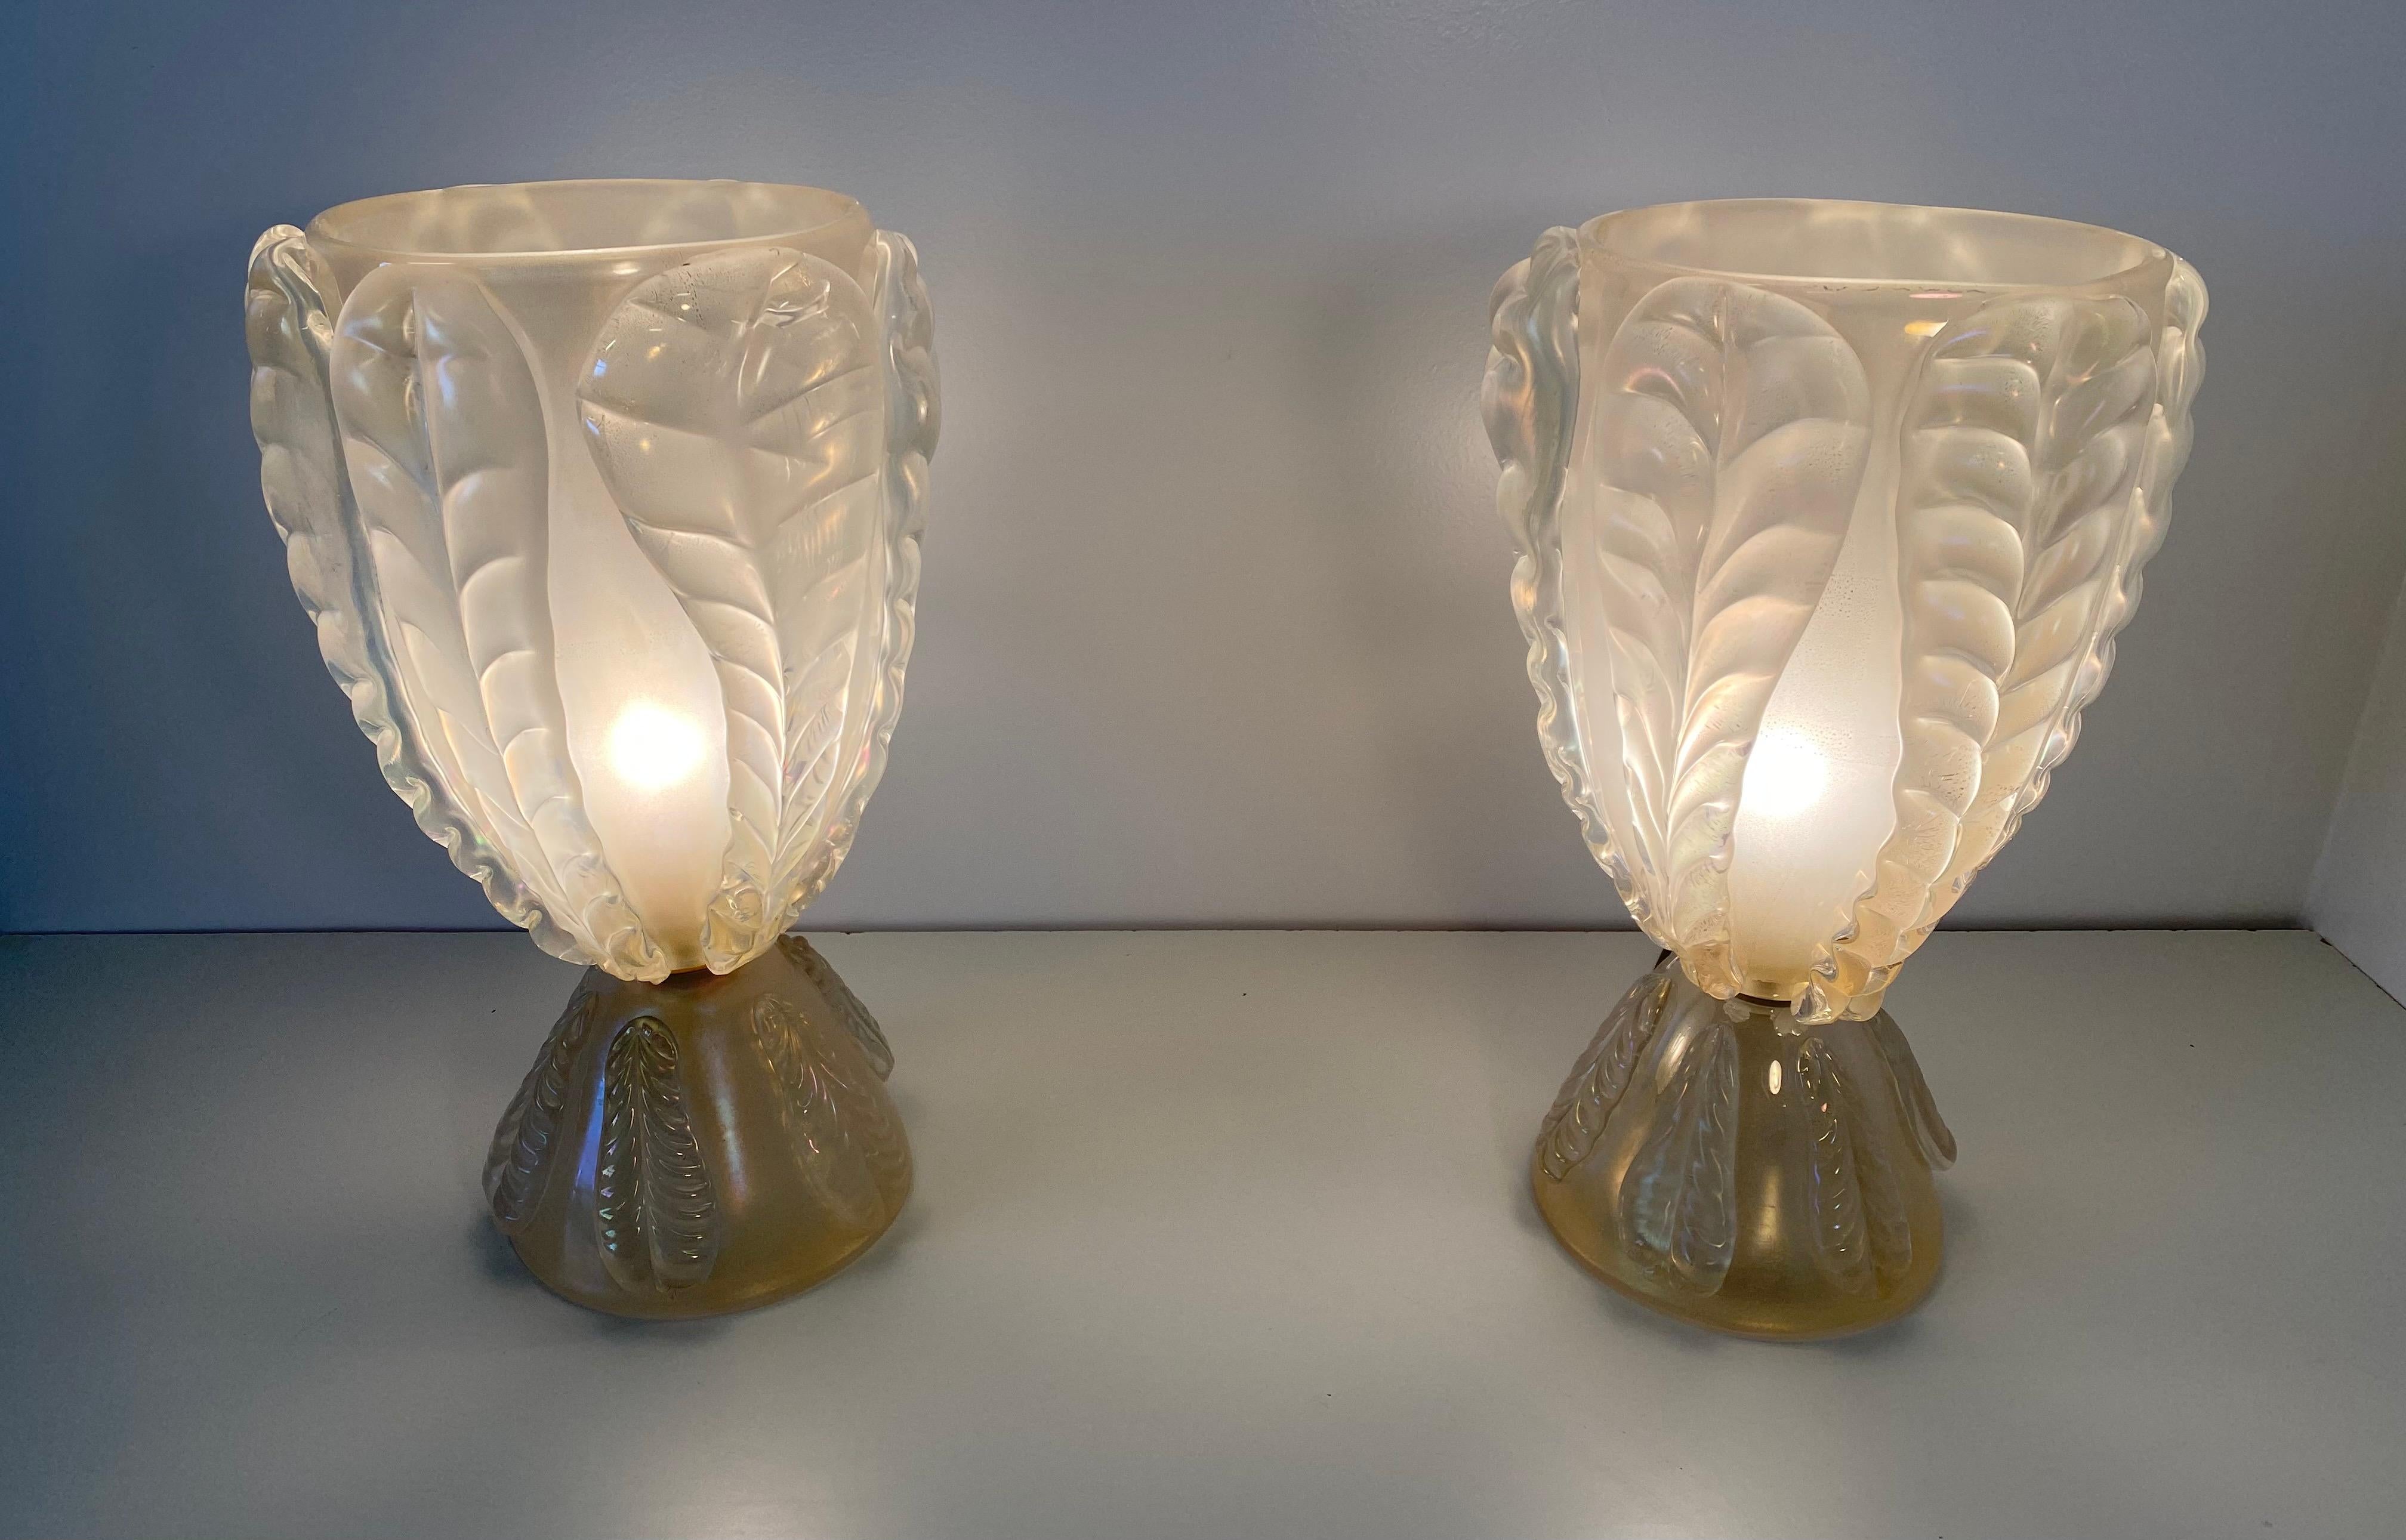 This impressive pair of glass lamps were produced in Murano in the early 2000s.
They are entirely in glass with a spectacular iridescent color.
Perfect conditions.